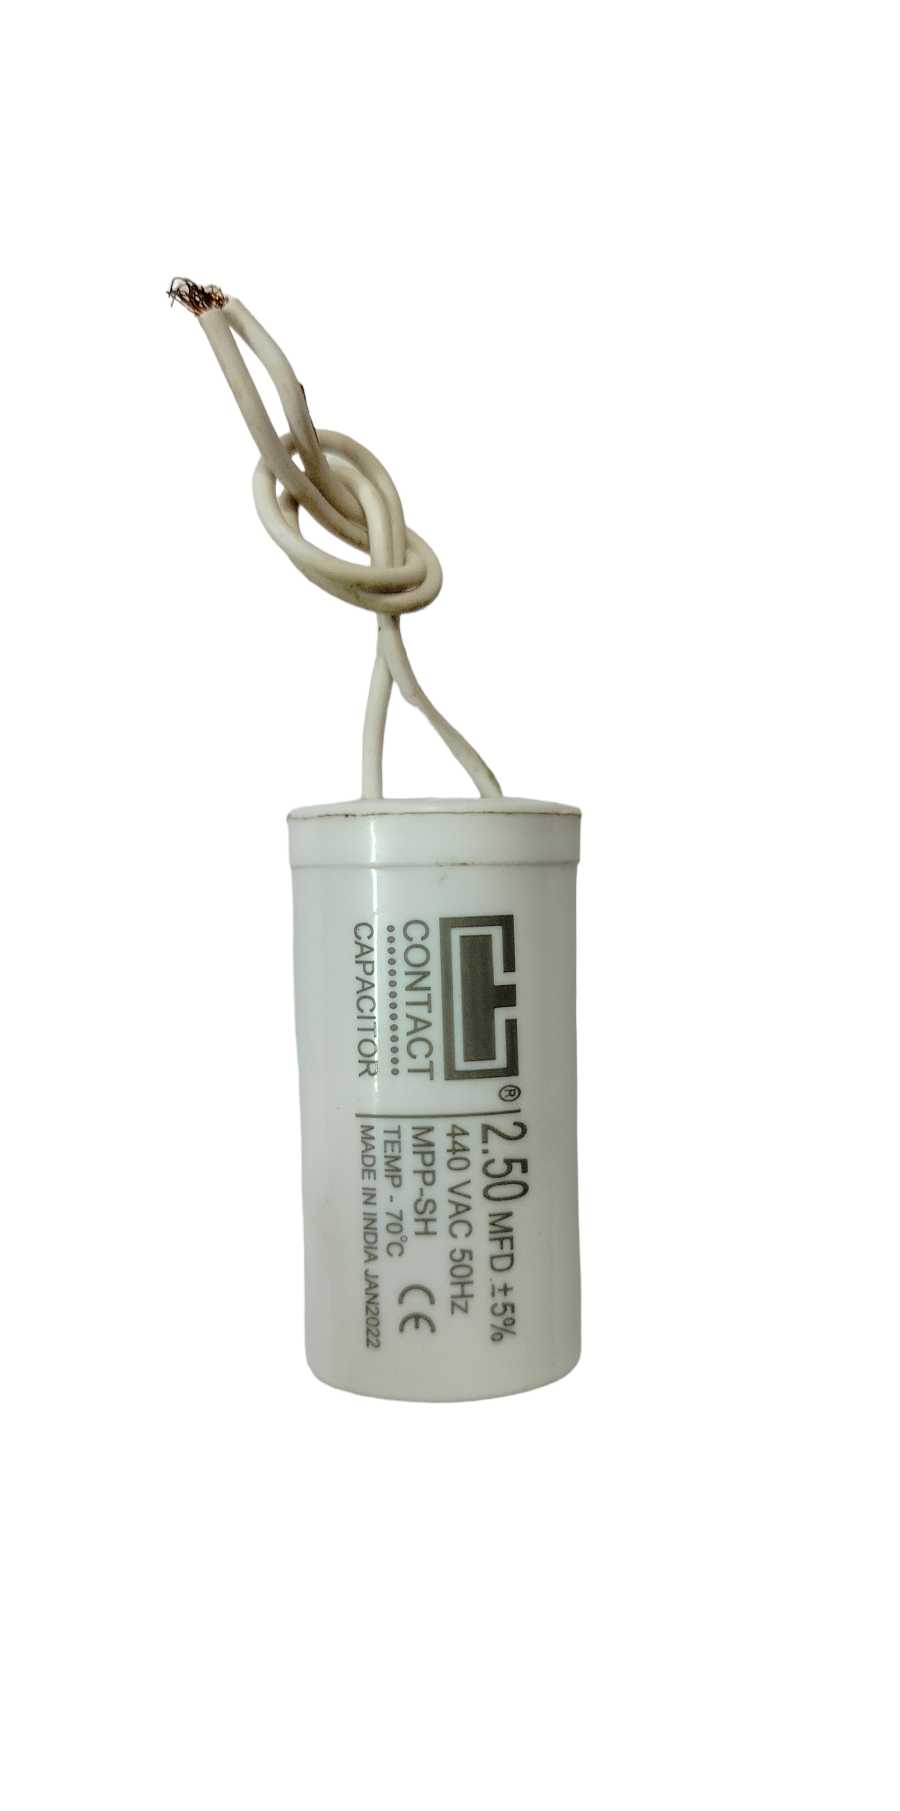 Contact Capacitor 2.50 MFD Supplier in pune